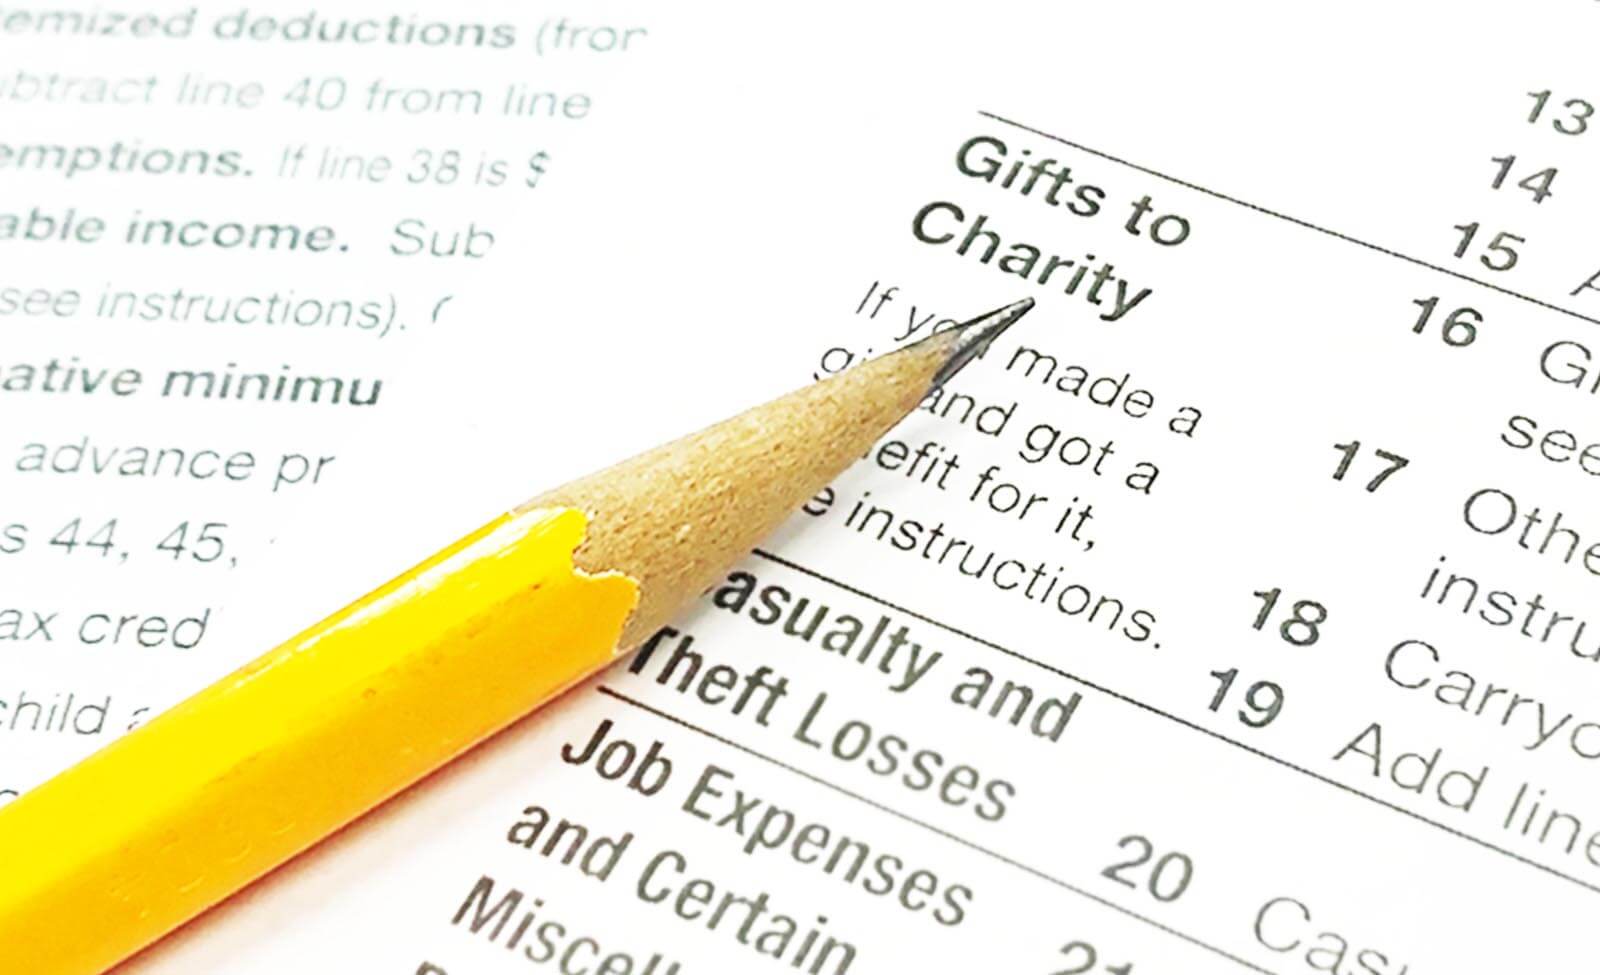 how to deduct charitable donations